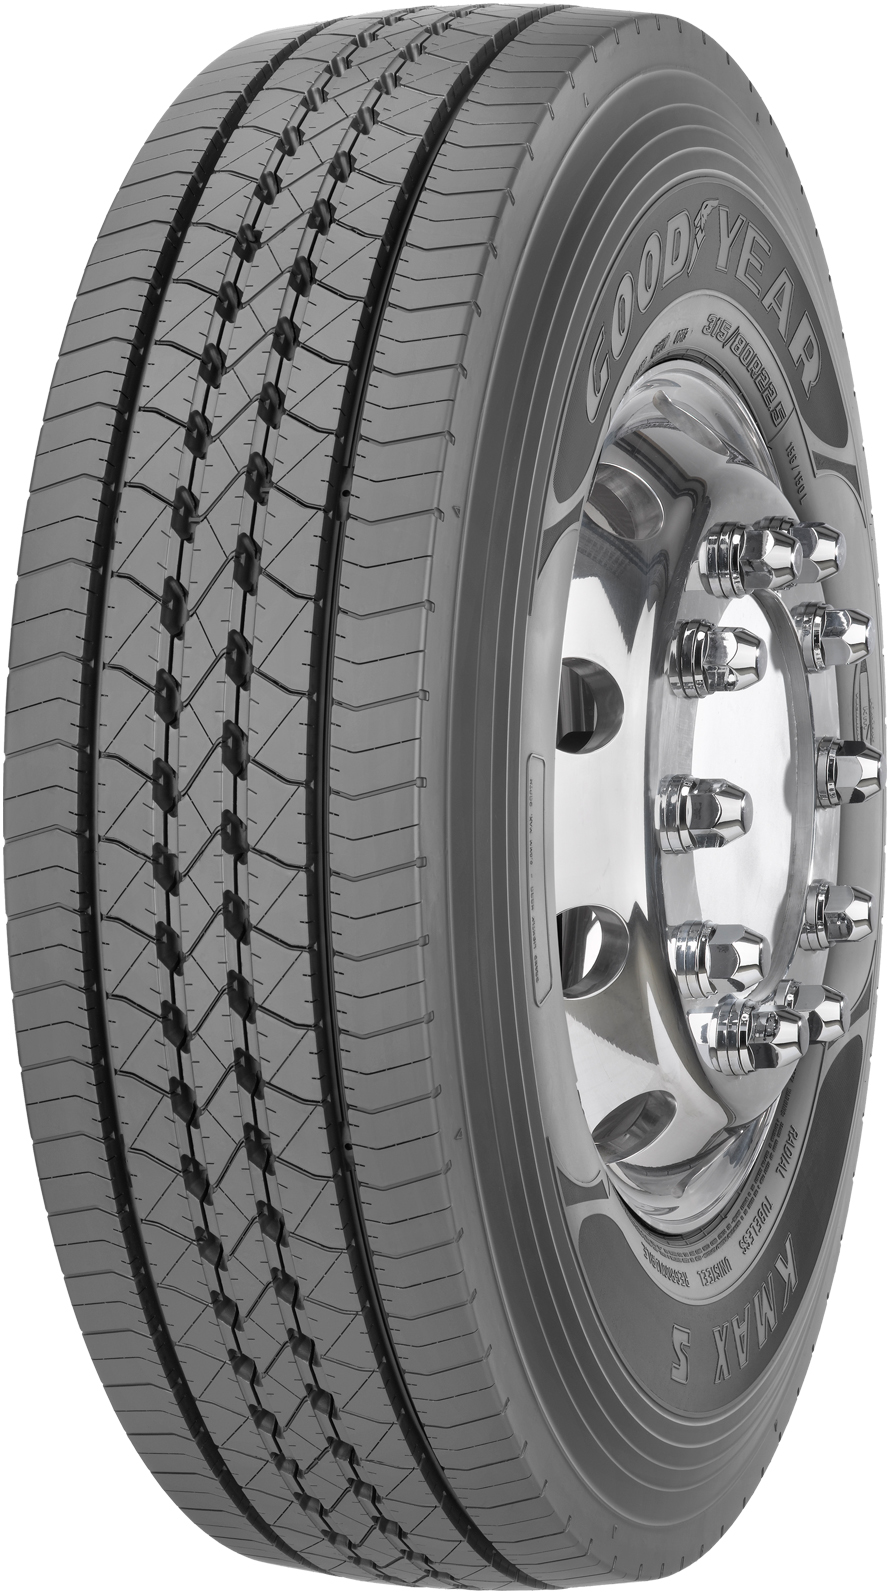 product_type-heavy_tires GOODYEAR KMAX S 16 TL 265/70 R17.5 139M